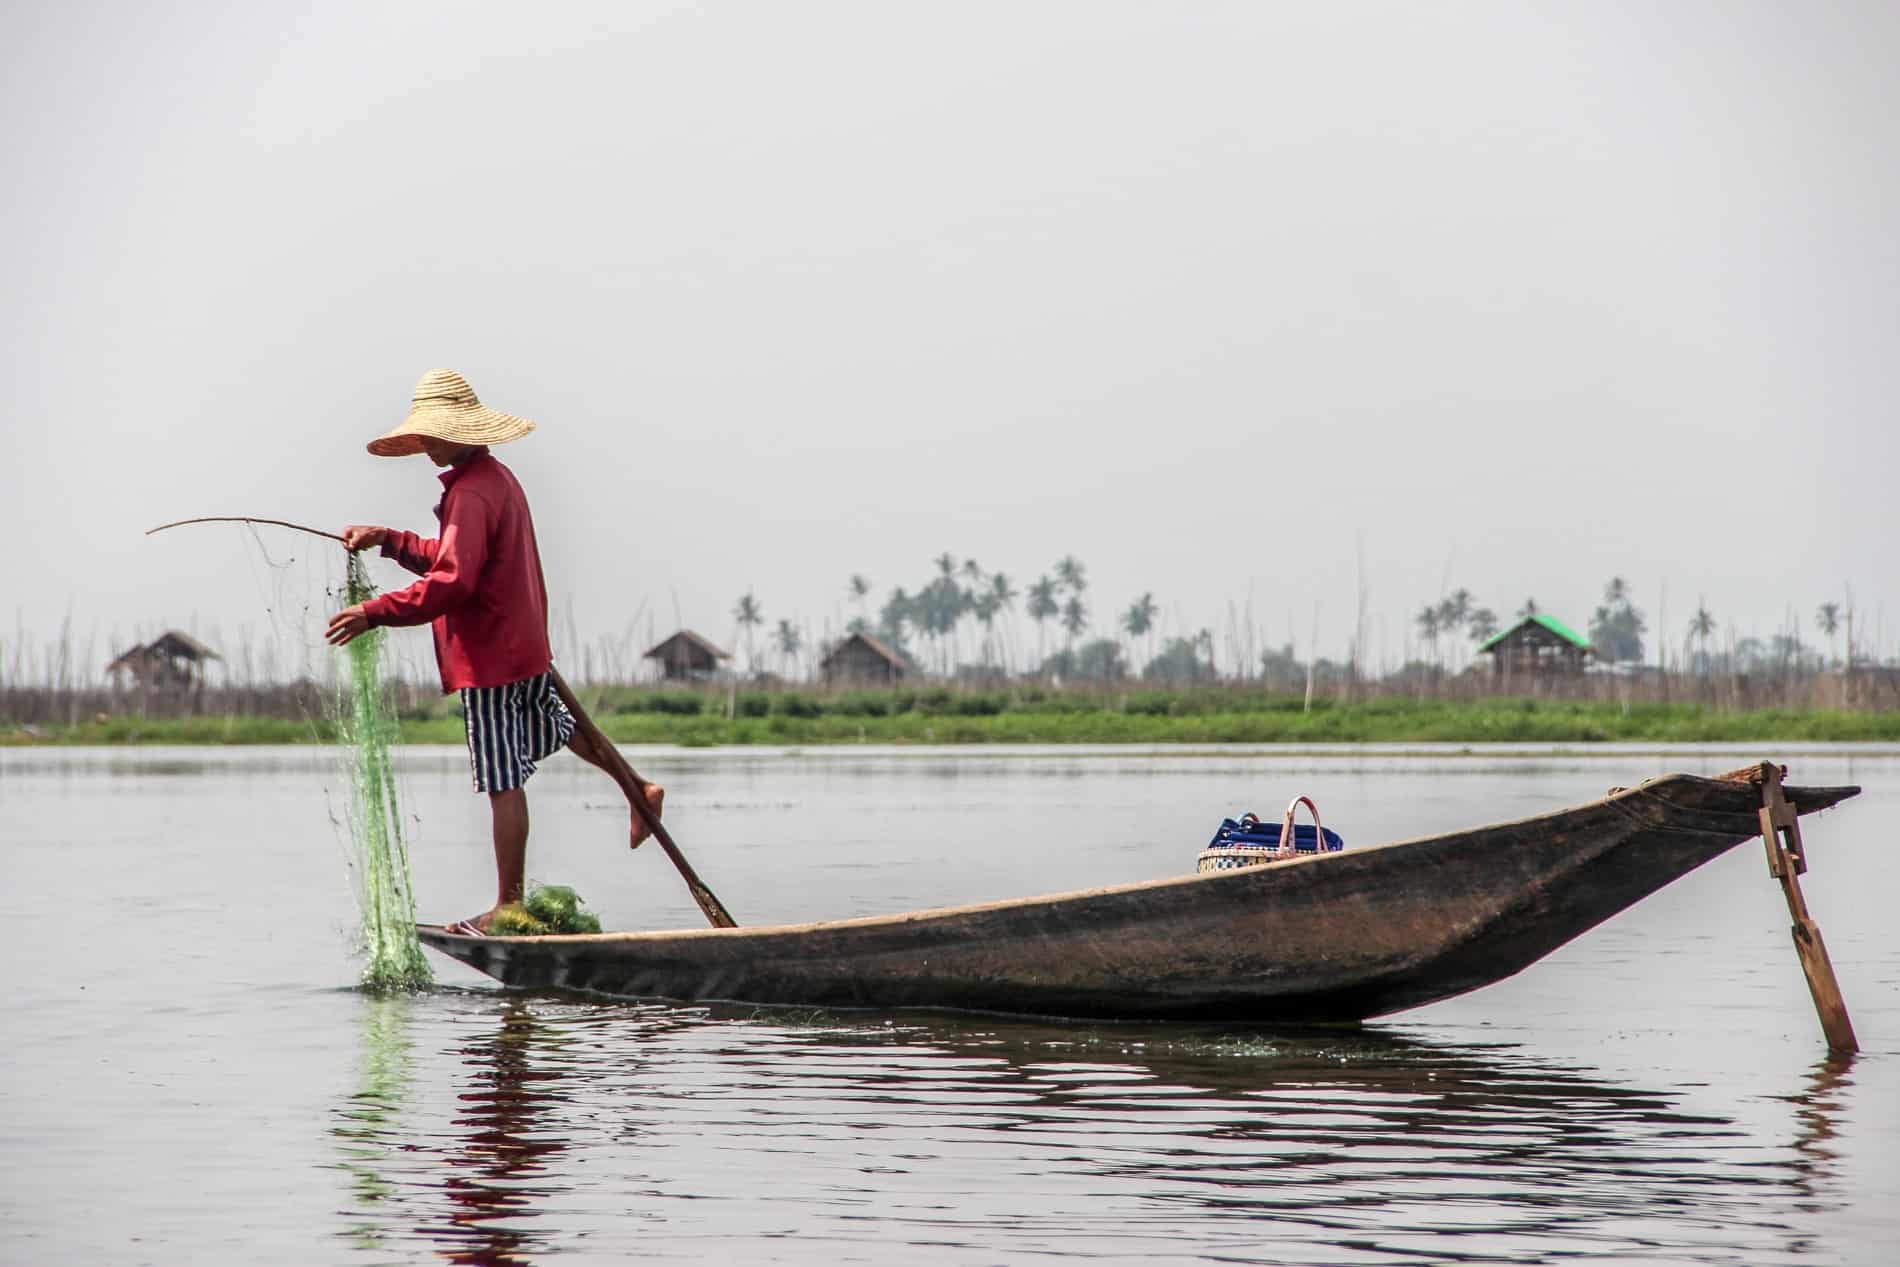 A fisherman with a green net, standing on his wooden boat Inle Lake in Myanmar practicing the traditional method of rowing the oar with one leg.